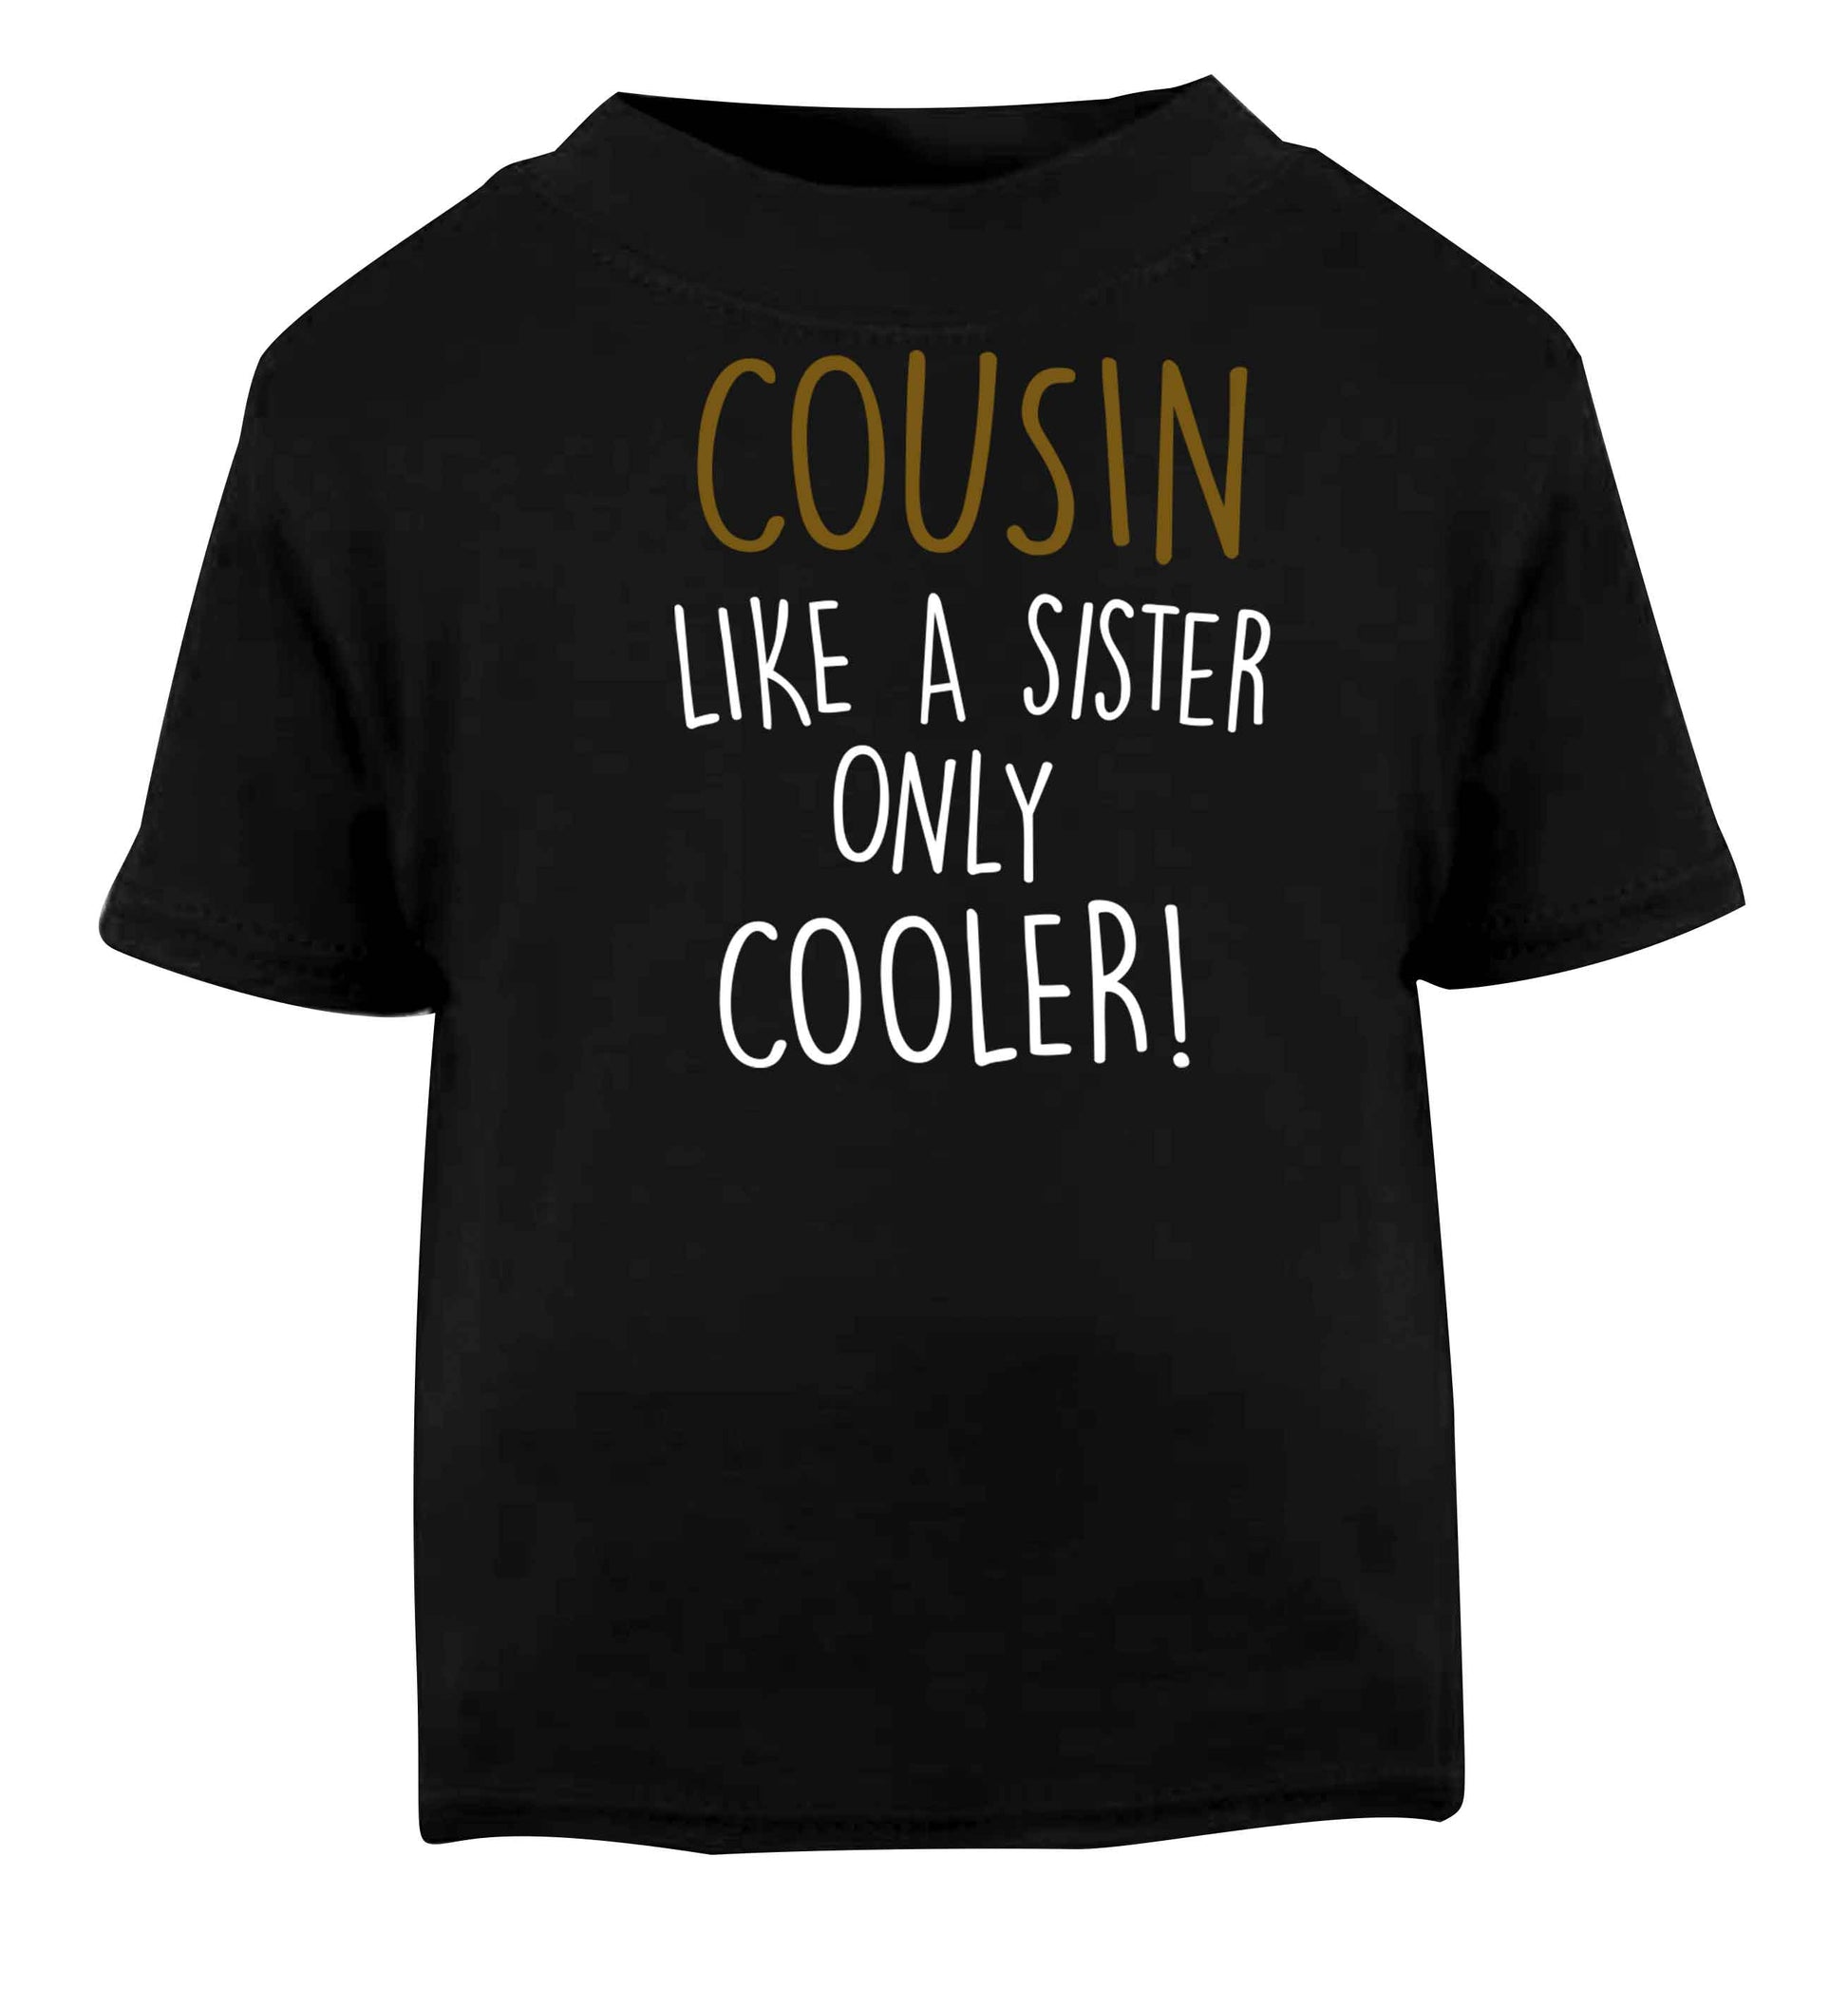 Cousin like a sister only cooler Black baby toddler Tshirt 2 years